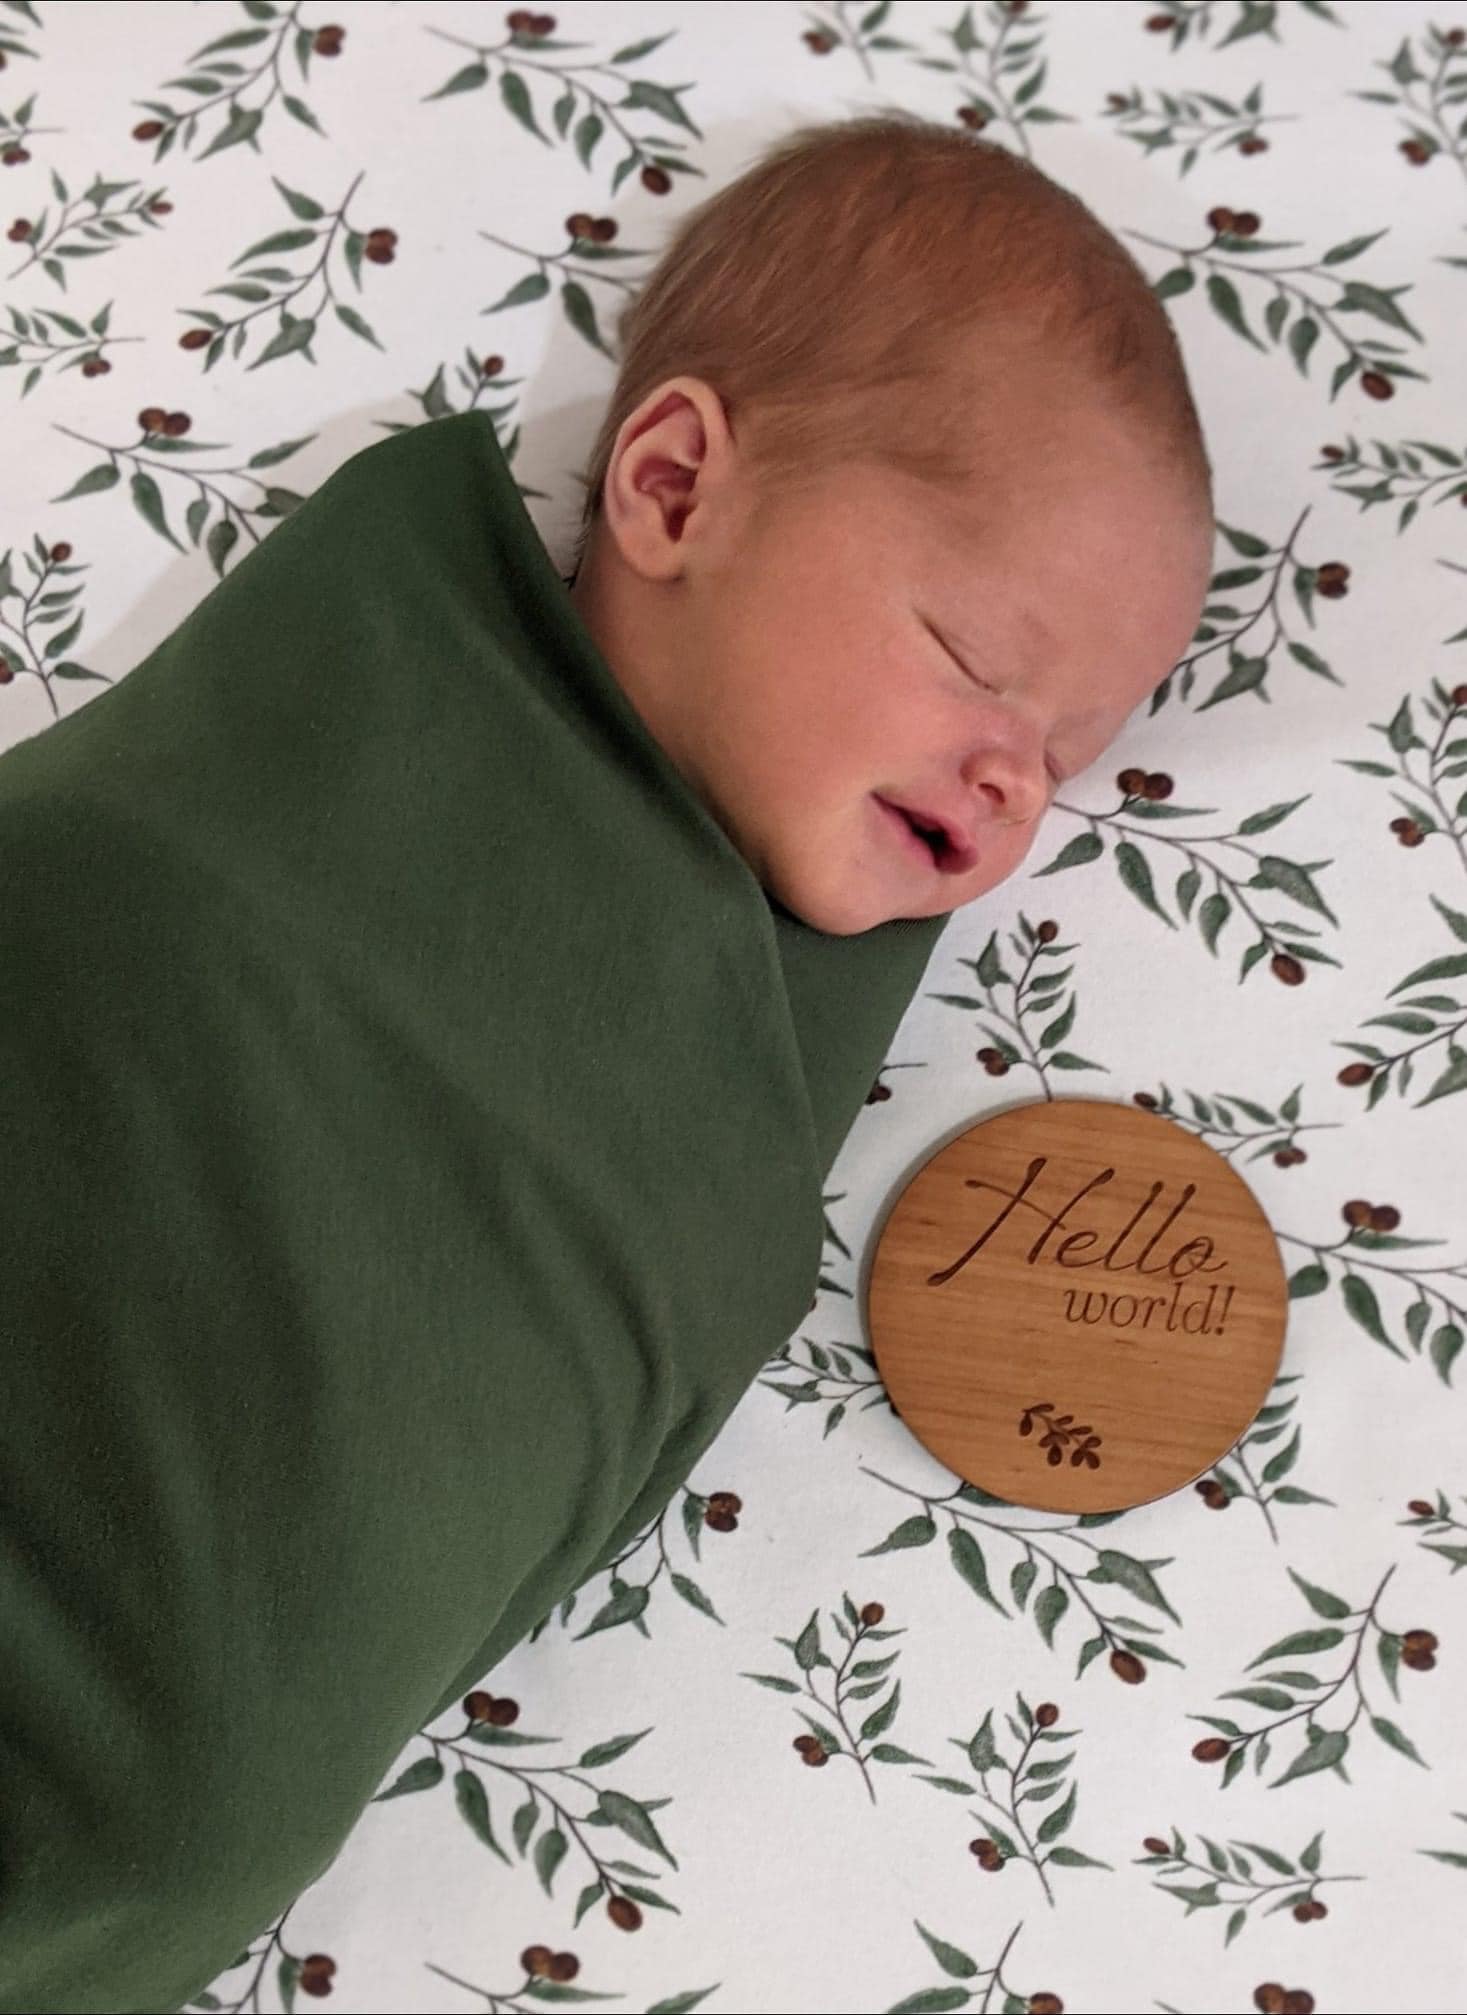 We are over the moon to share the news that sweet Oliver Thomas Joubert arrived on the 28.06.21!